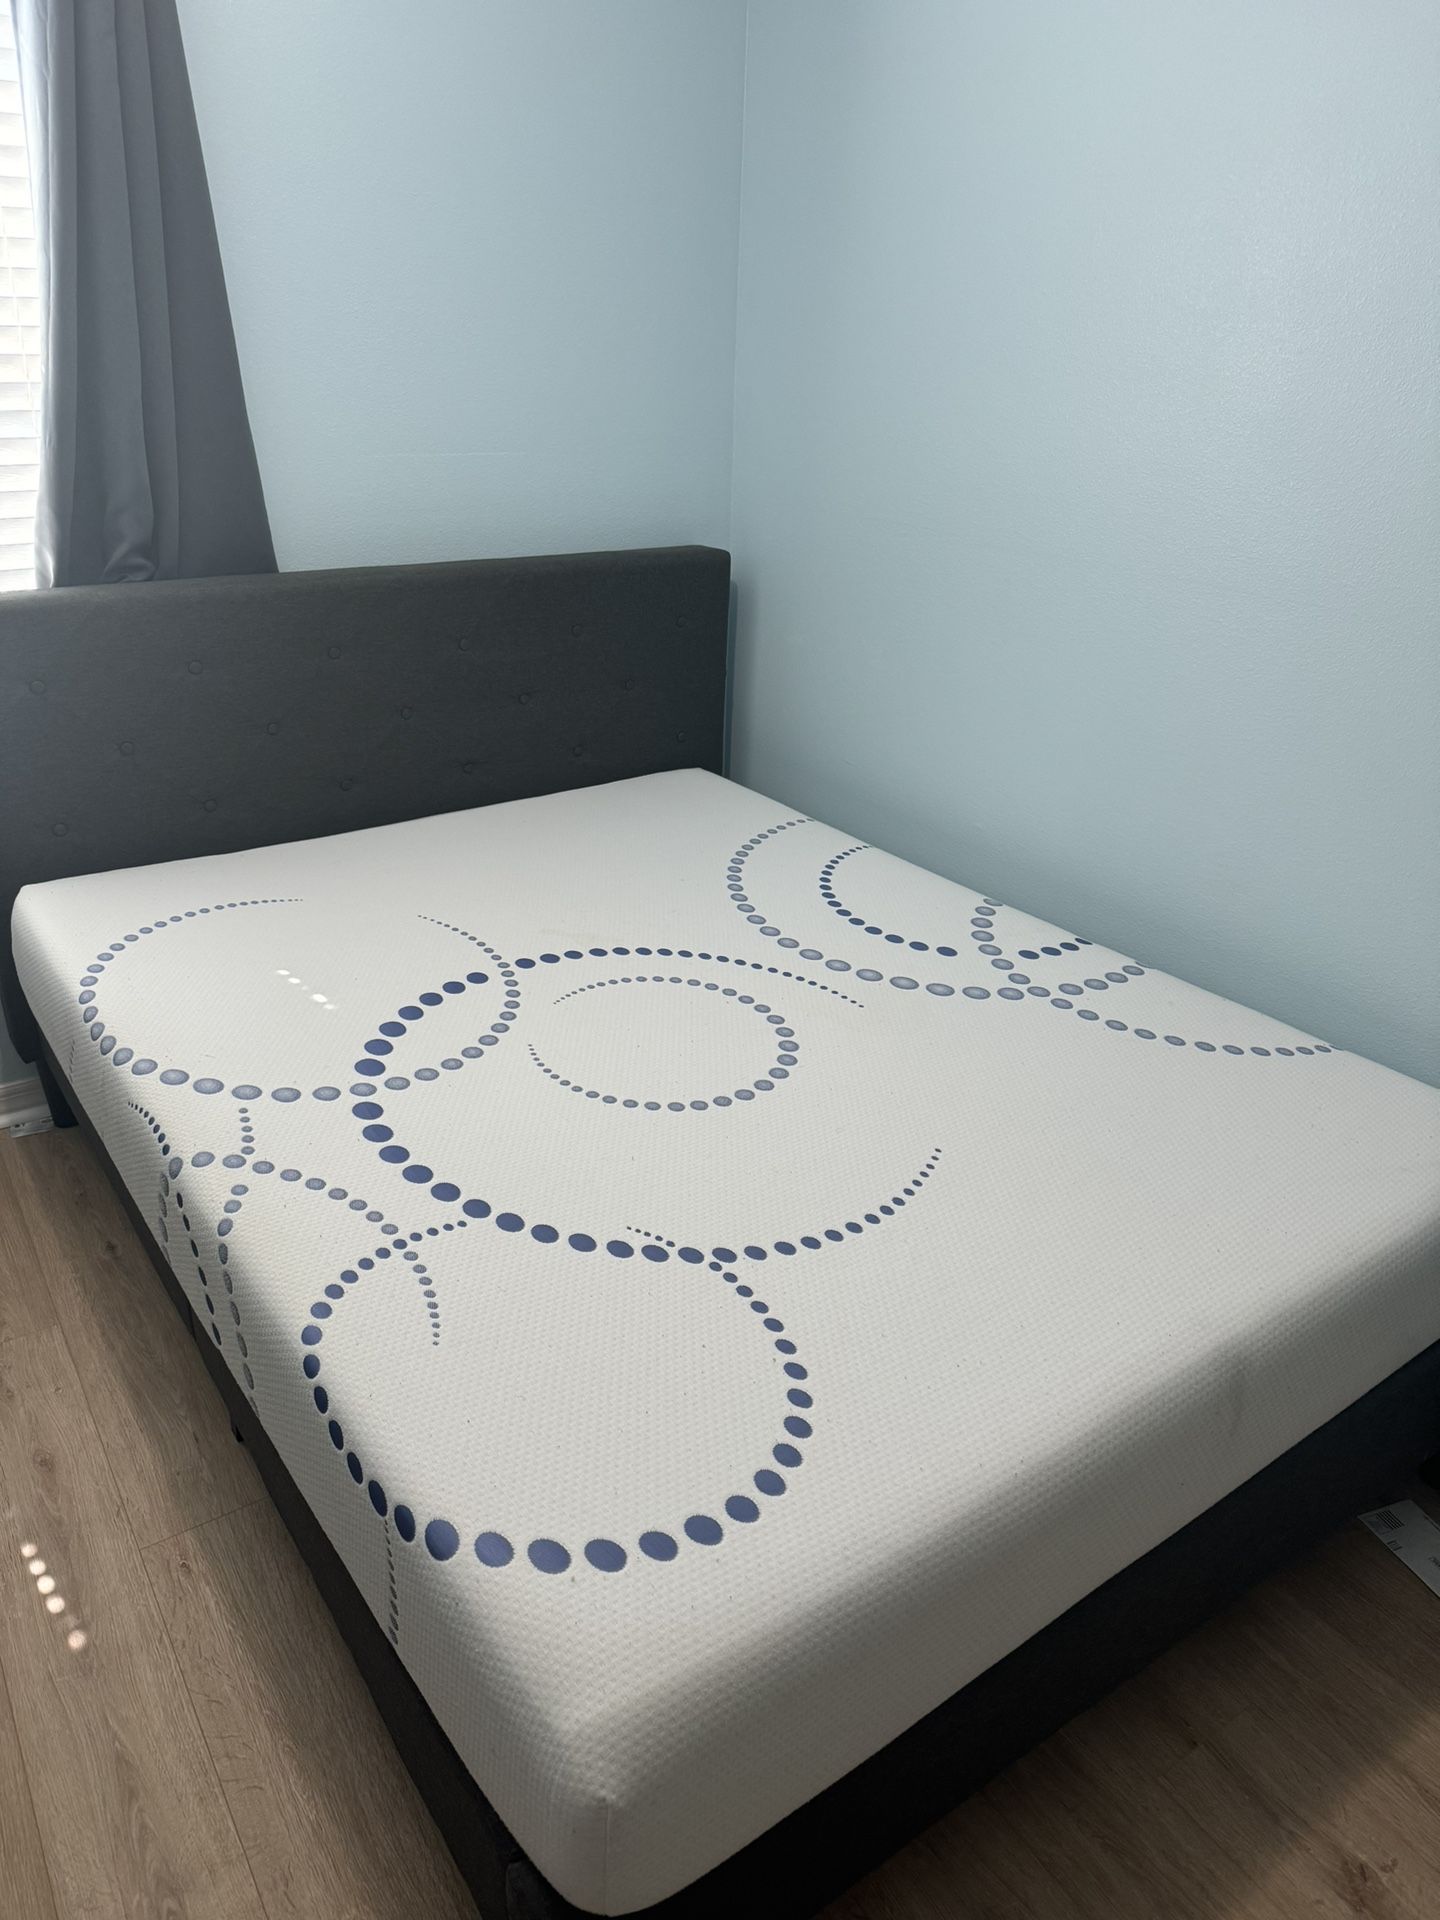 Queen Sized Mattress With Bed Frame